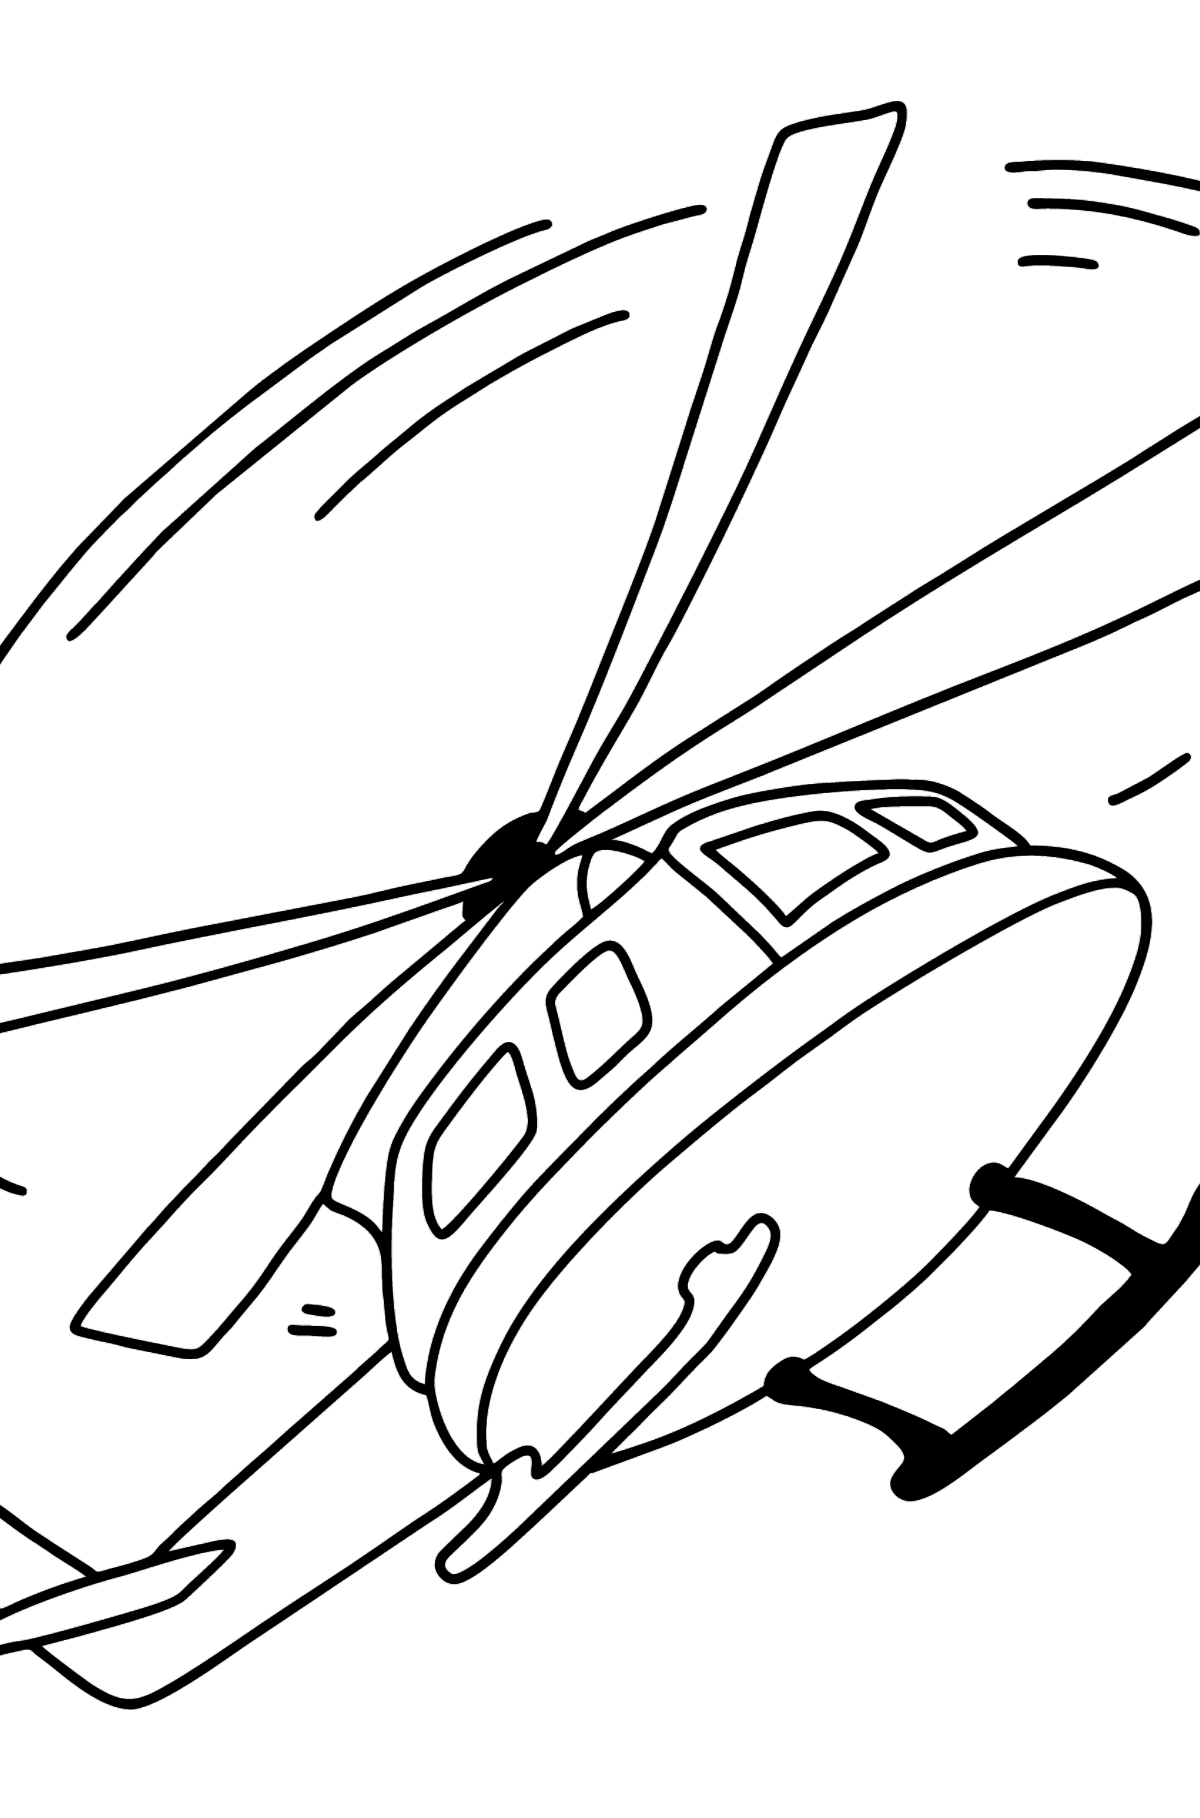 Helicopter coloring page online ♥ Print and Online for Free